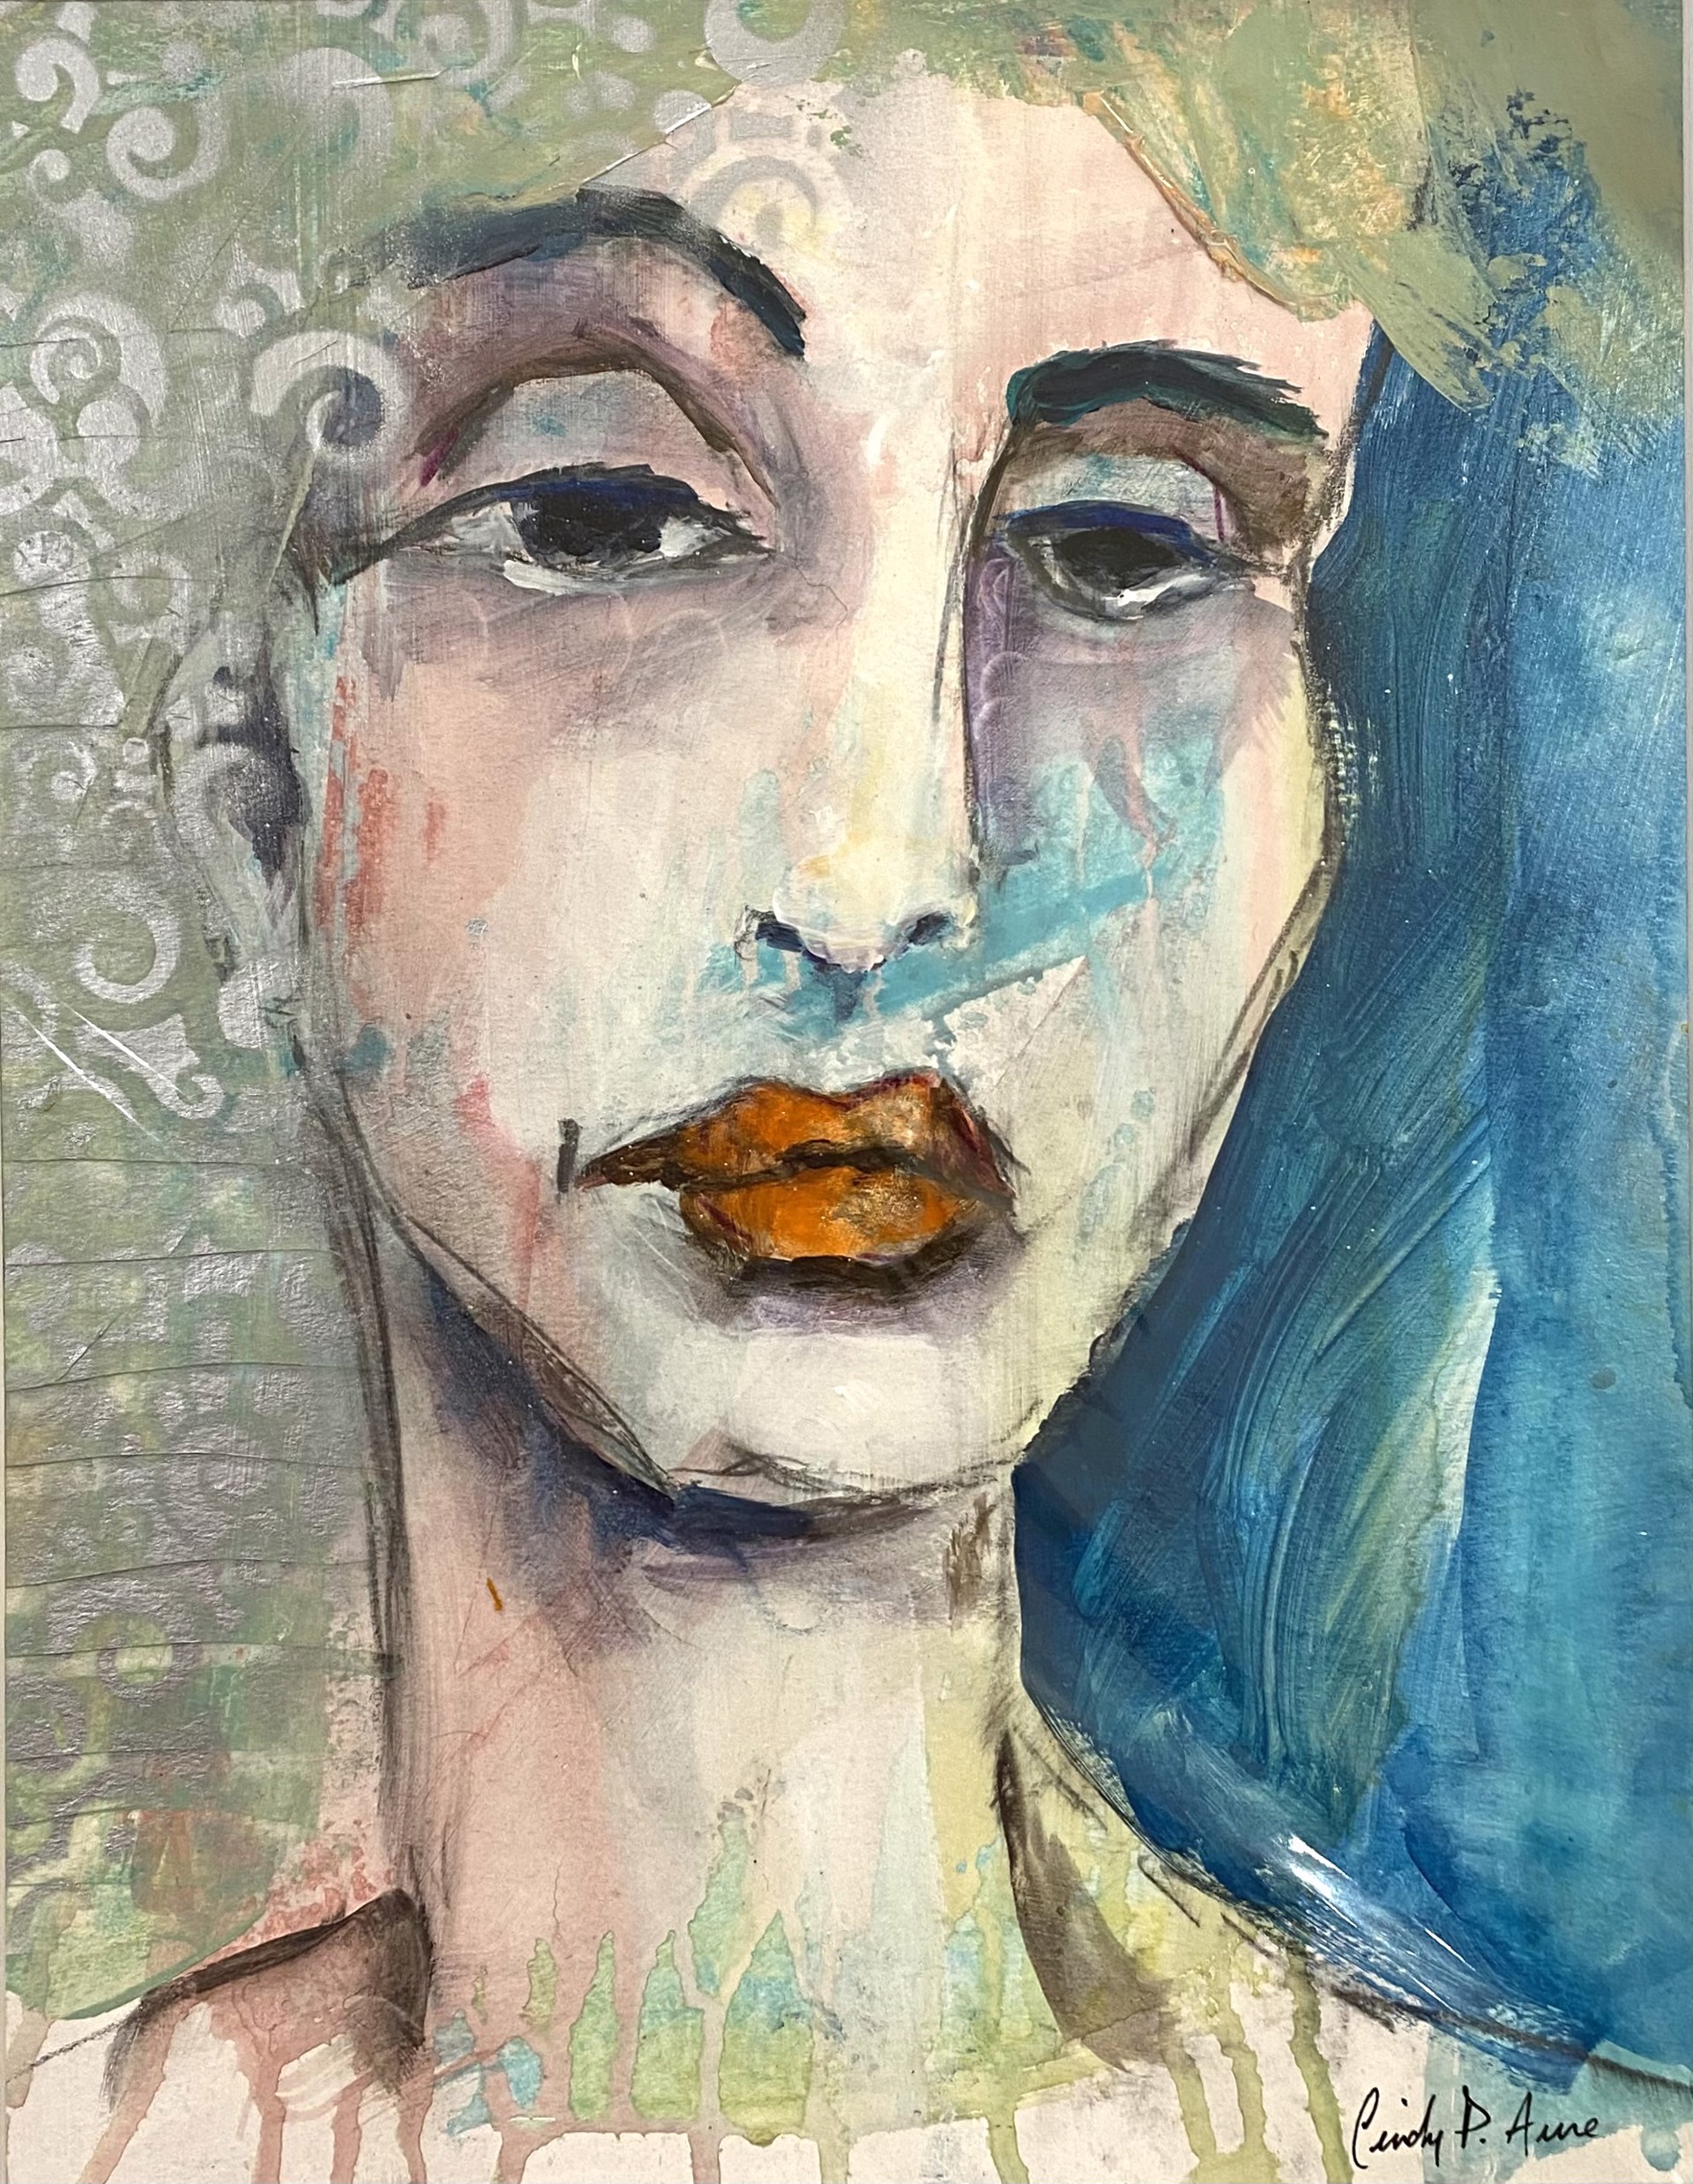 Faces #1 by Cindy Aune